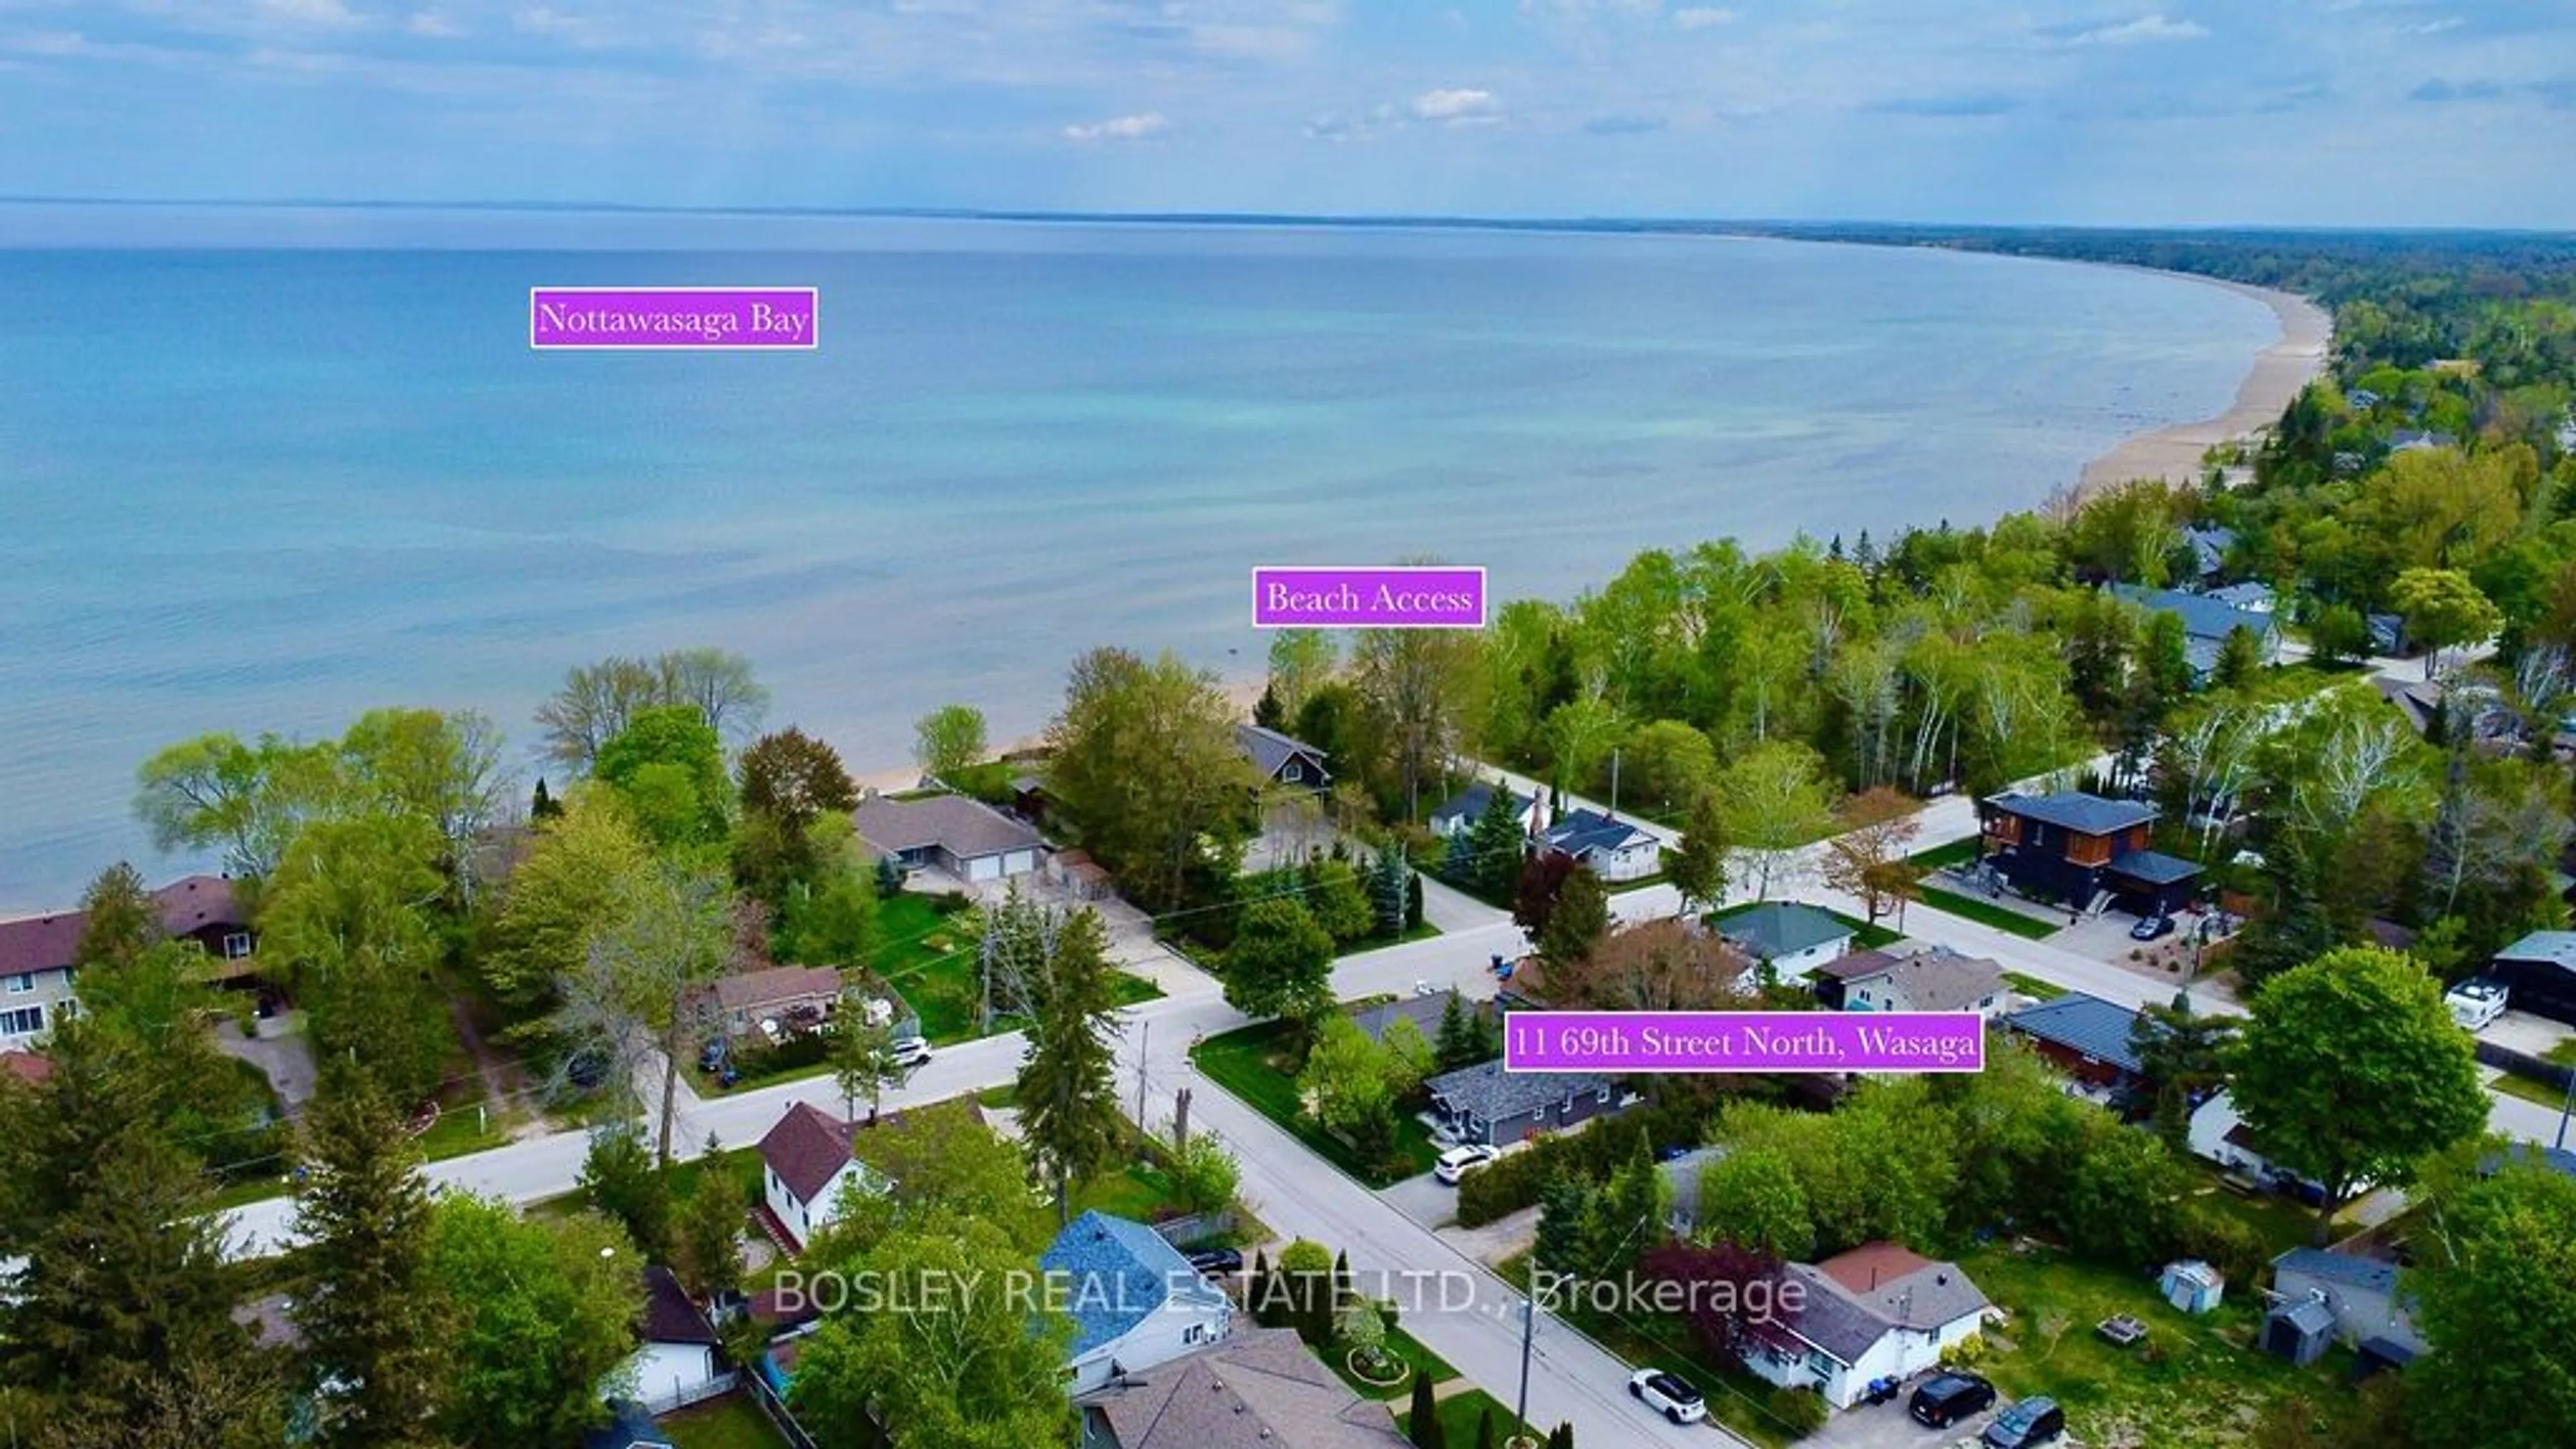 Lakeview for 11 69th St, Wasaga Beach Ontario L9Z 1T9